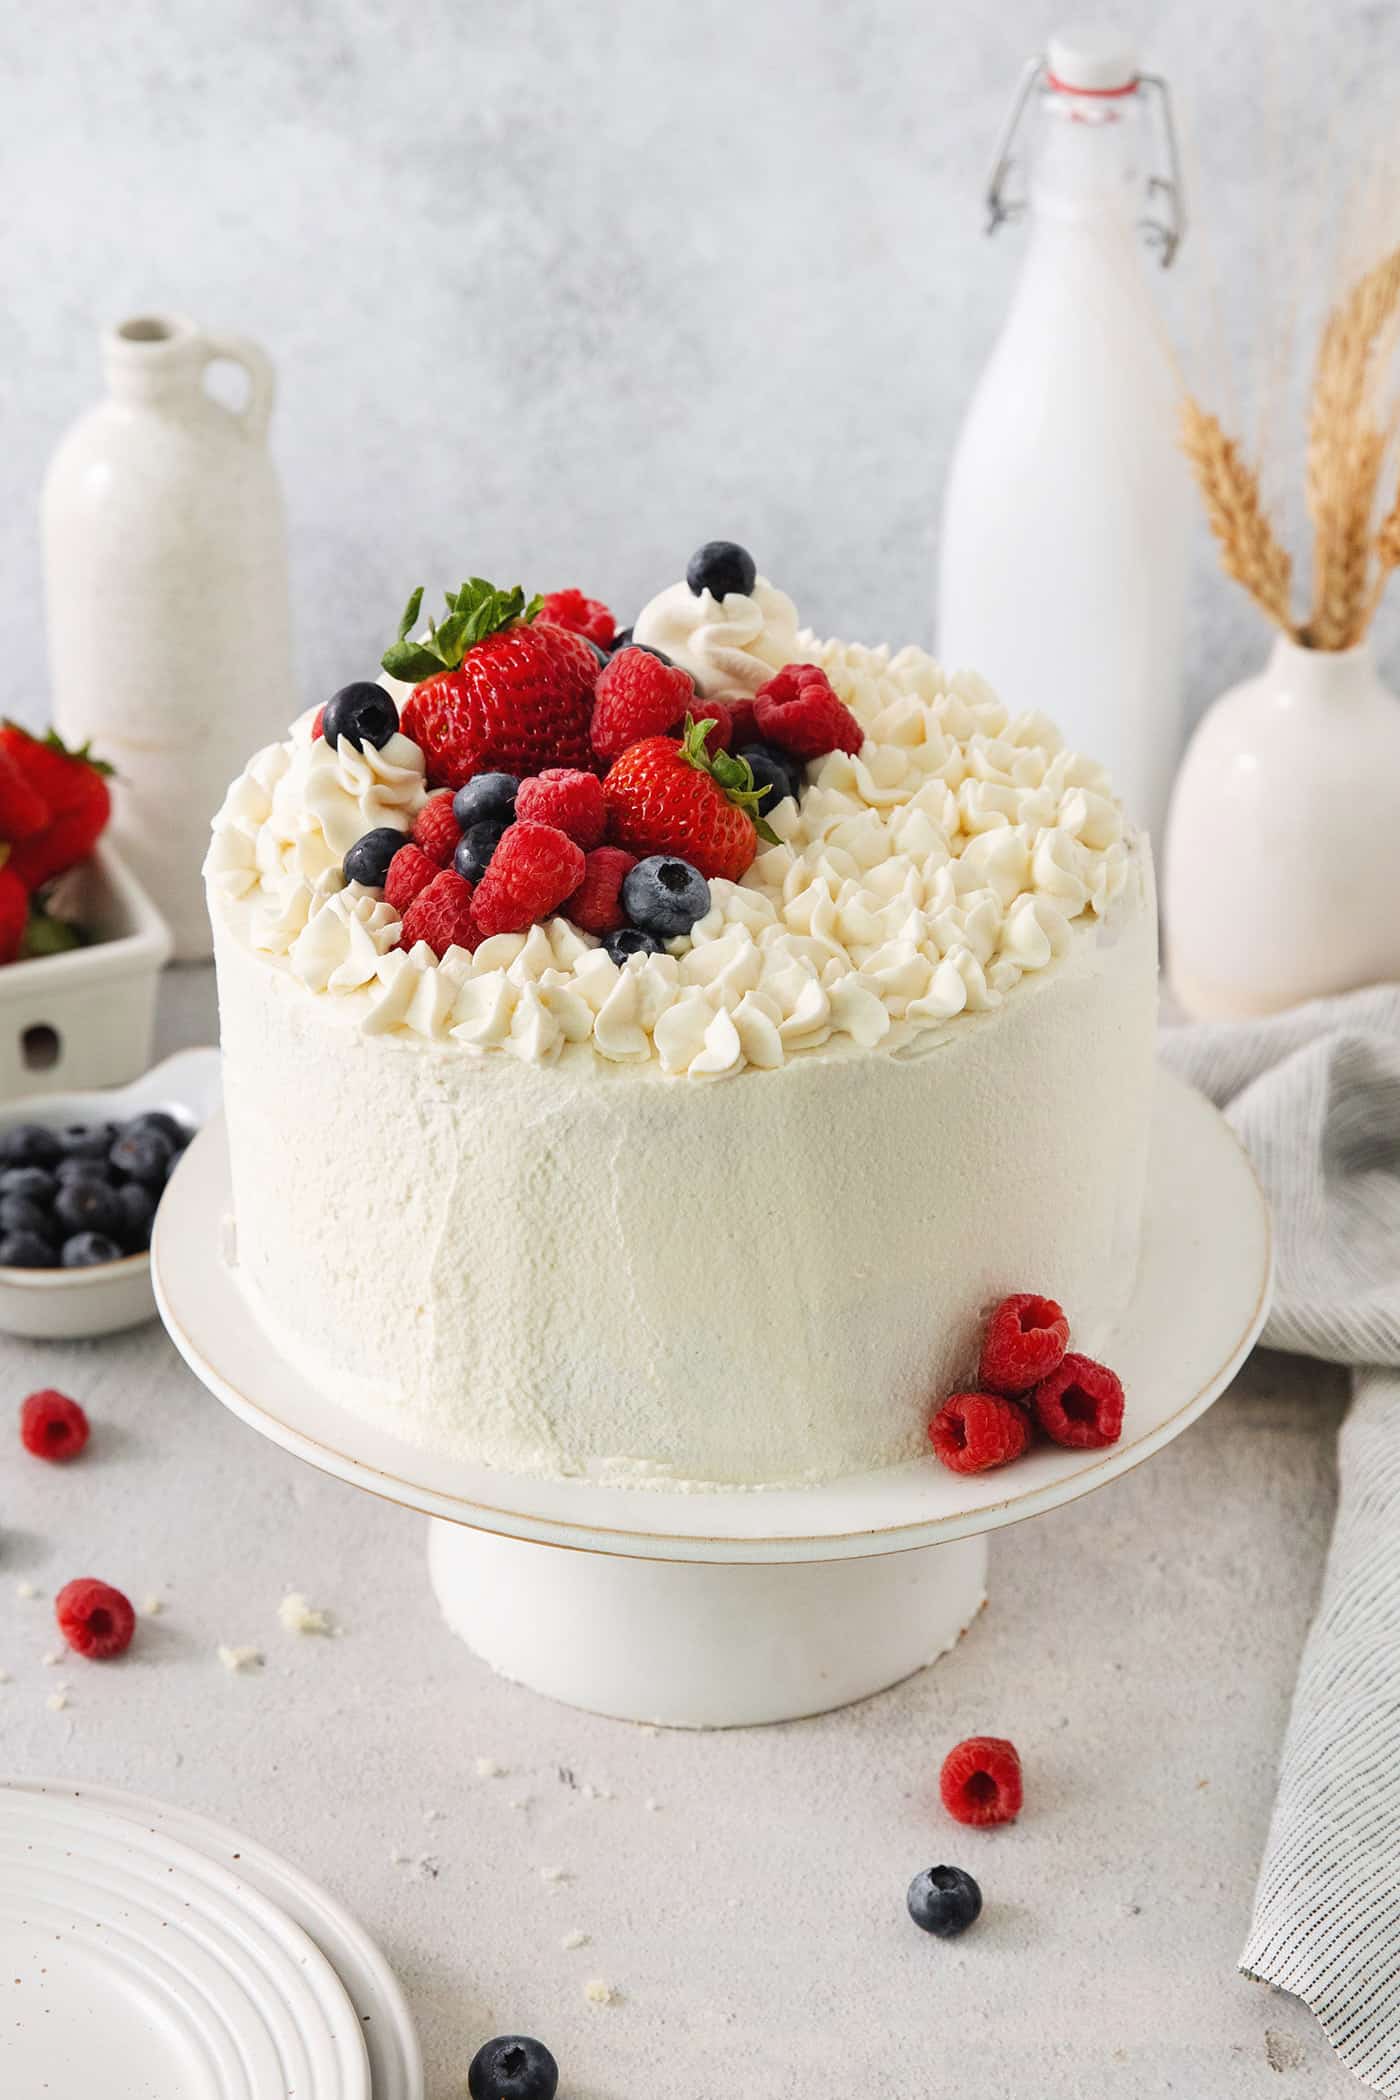 A Chantilly cake on a white cake stand topped with berries.